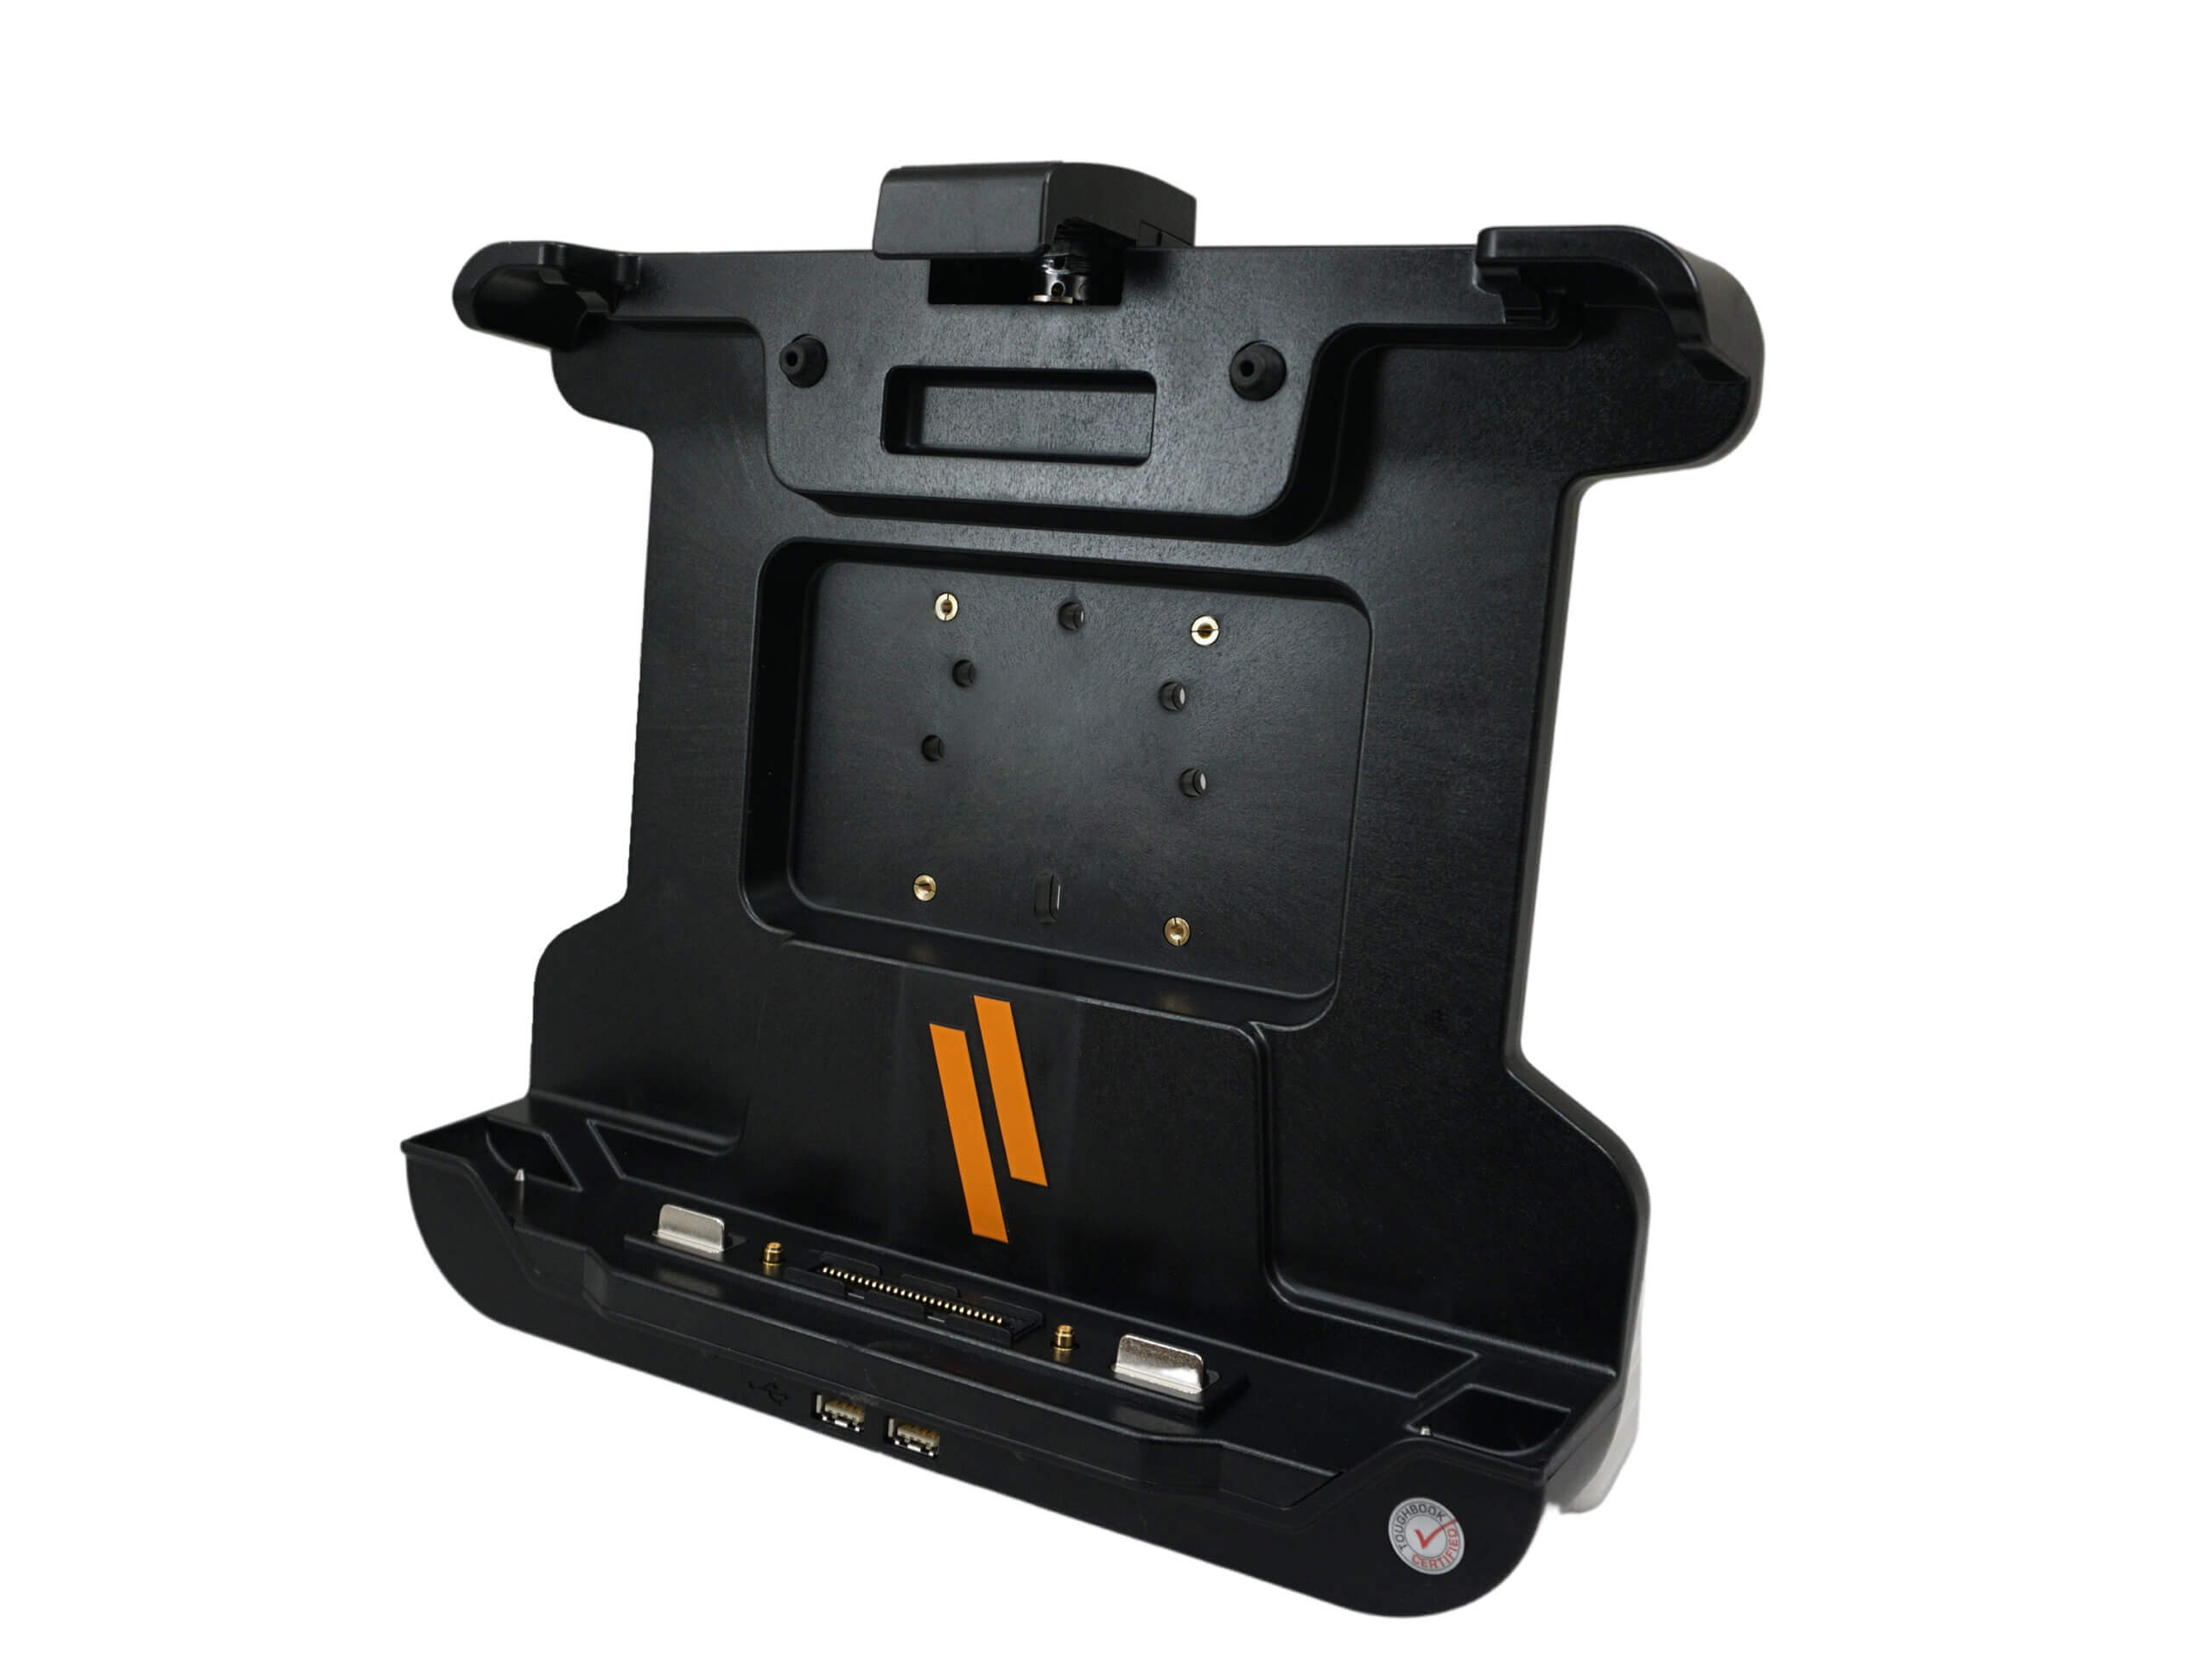 Docking Station For Panasonic TOUGHBOOK 33 Tablet with Advanced Port Replication & Dual Pass-Thru Antenna Connections